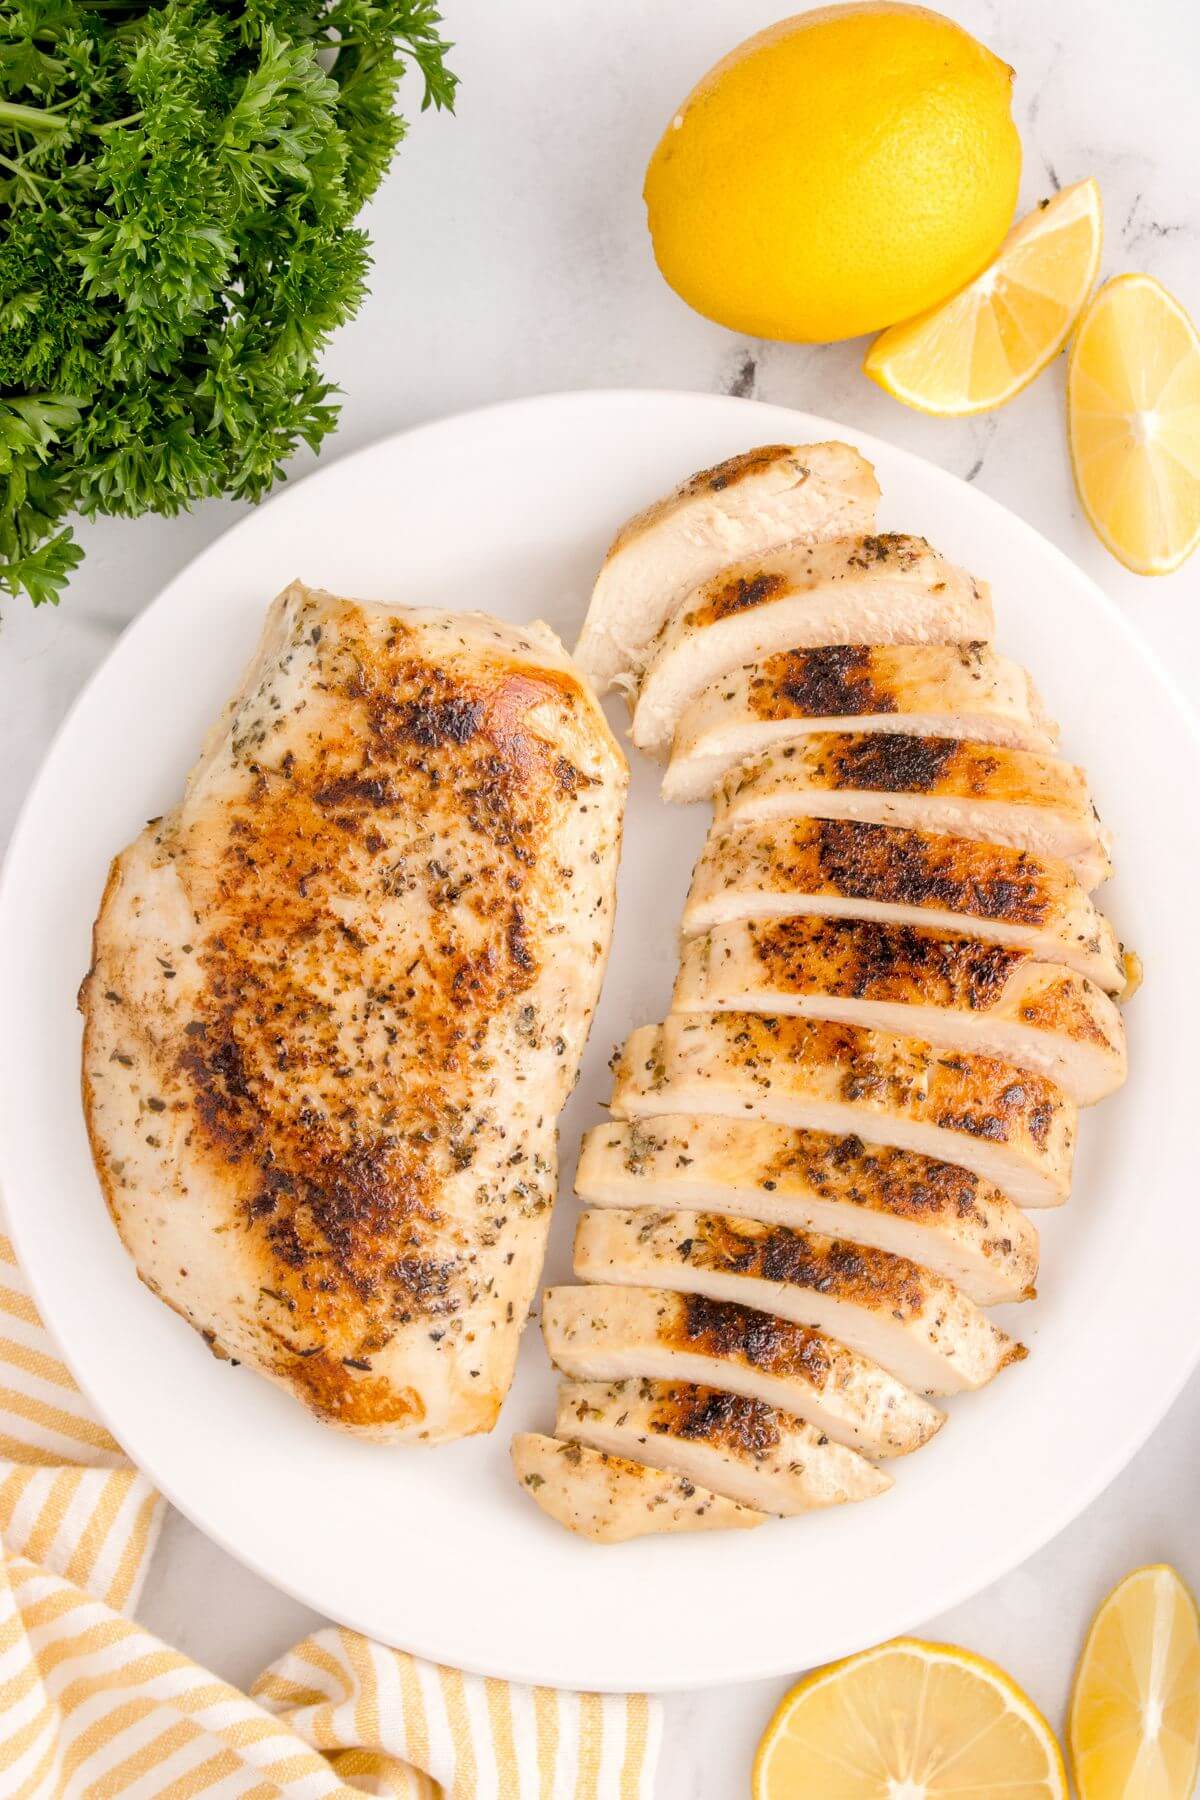 A plate full of both chicken breasts, one whole and one sliced, is next to greens and lemons on table.